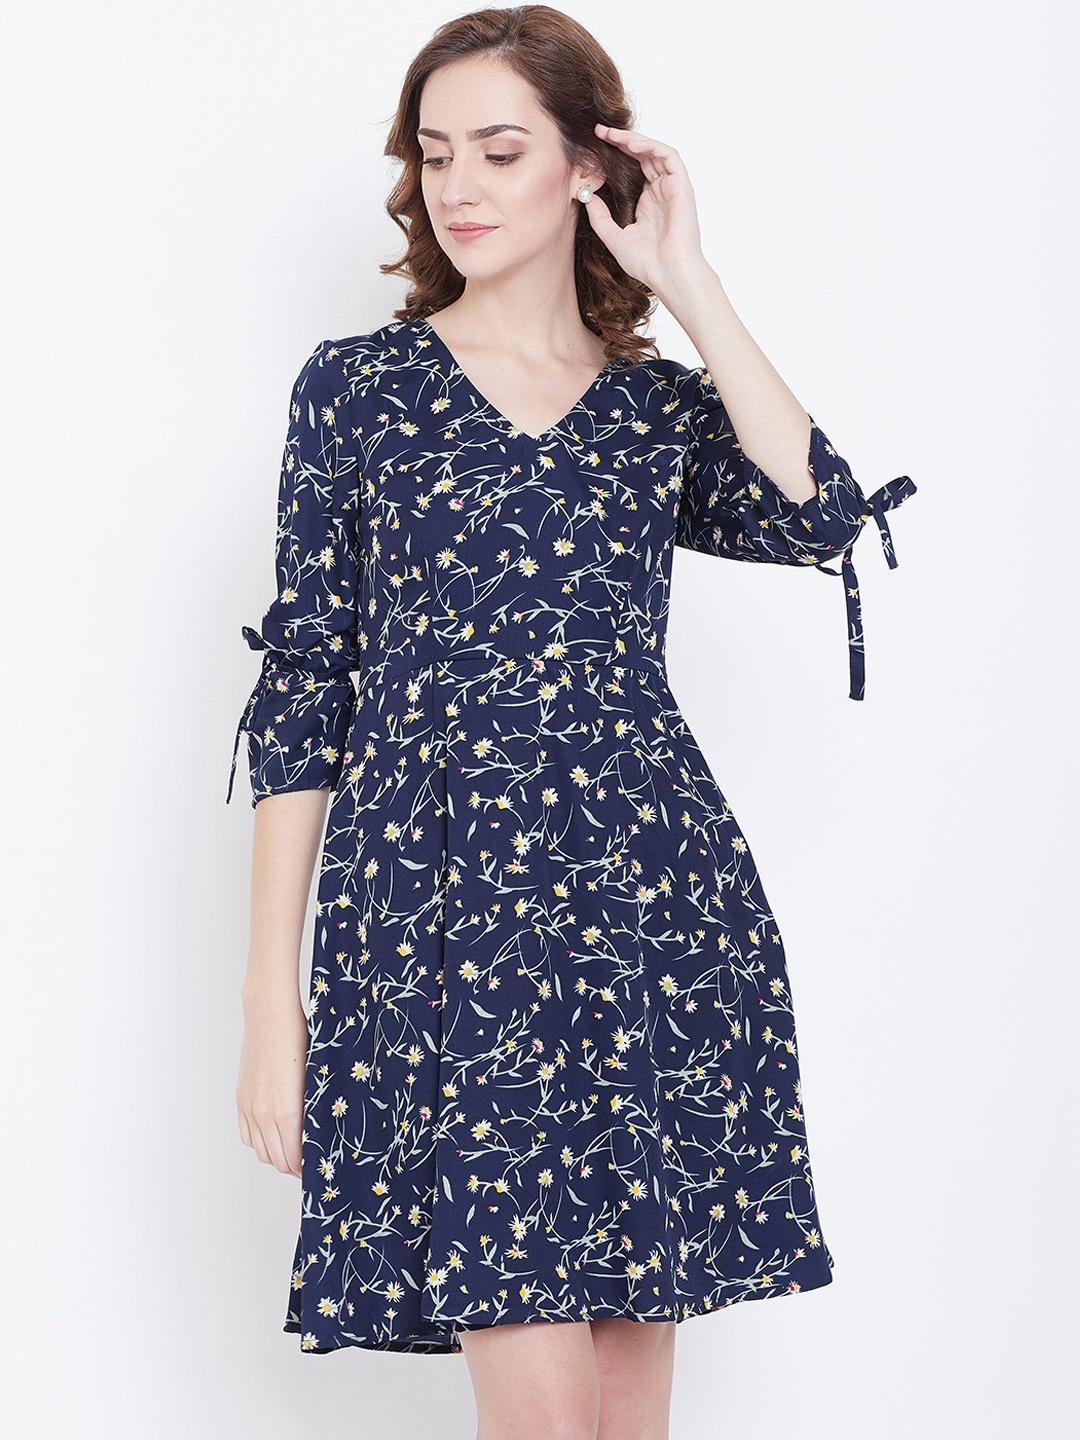 DODO & MOA Women Navy Blue Floral Print Fit and Flare Dress